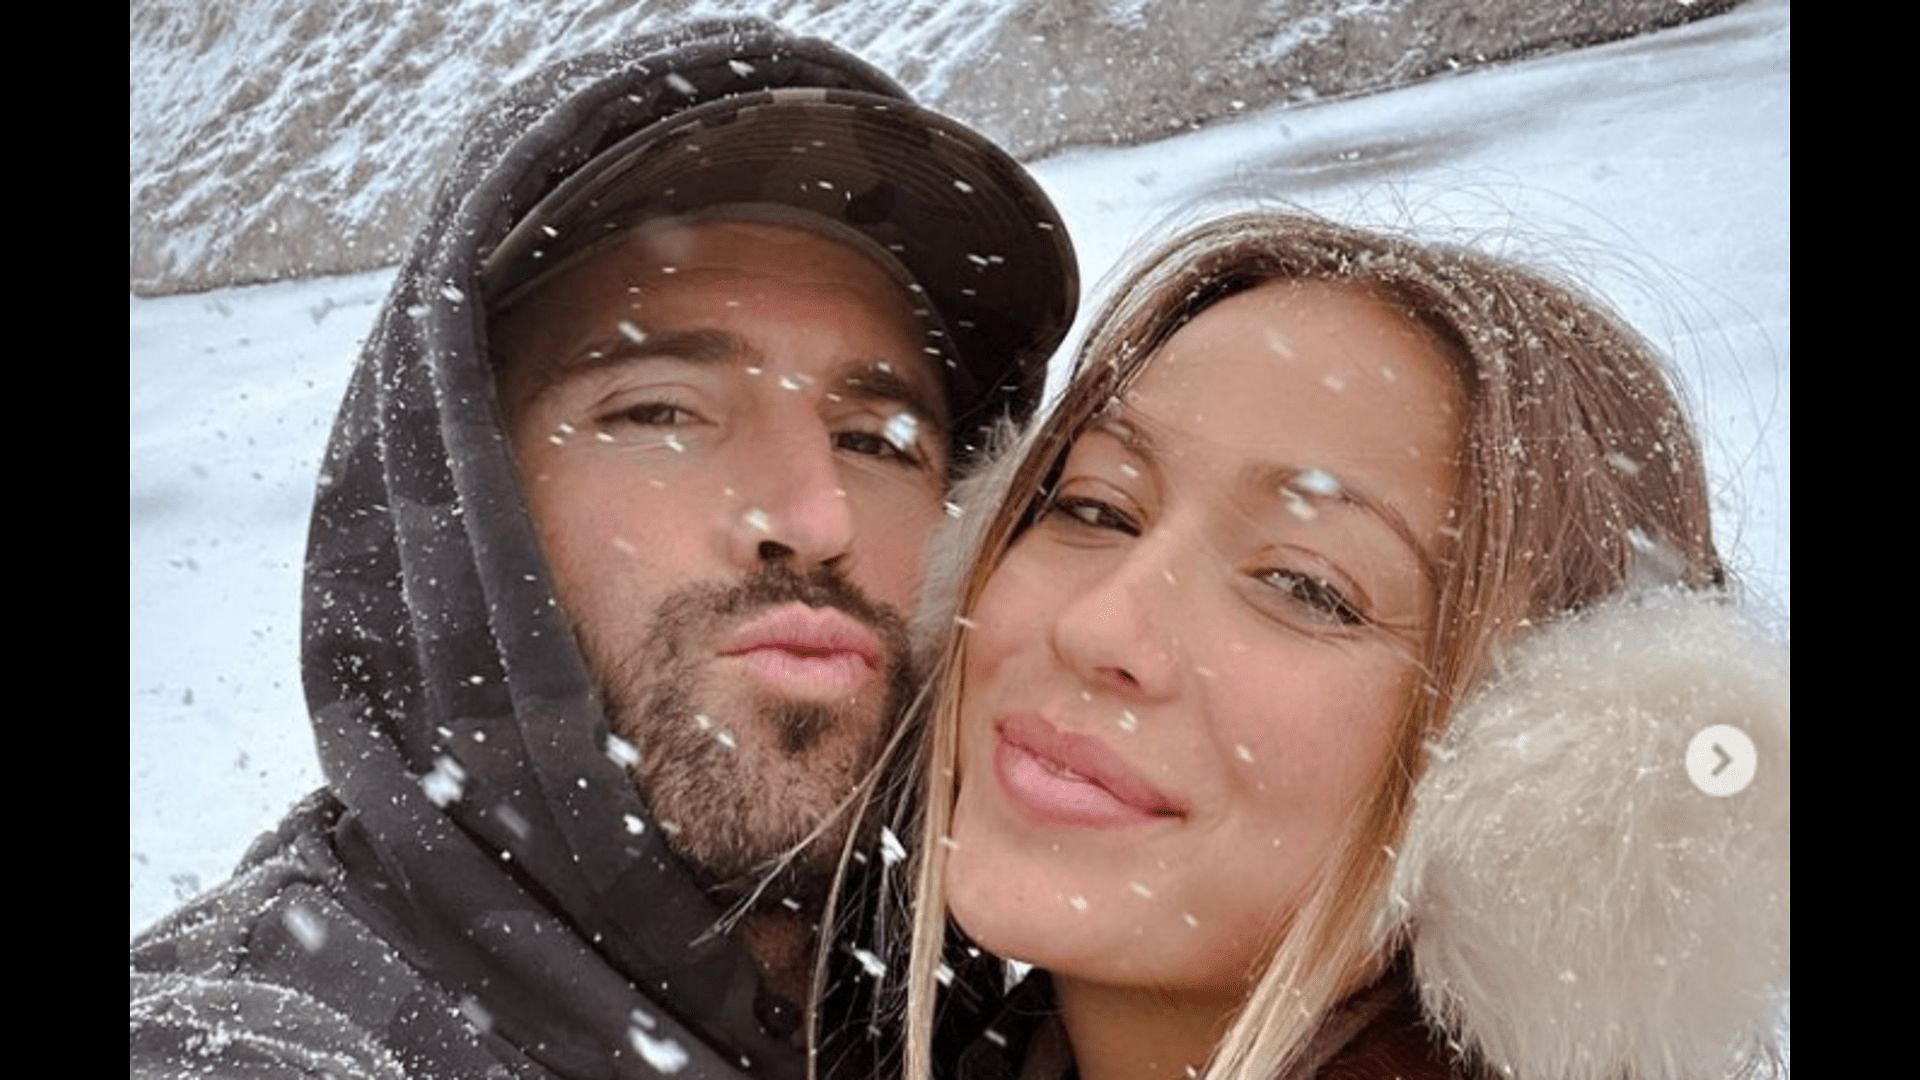 Tia Blanco with her beau Brody Jenner on Valentine